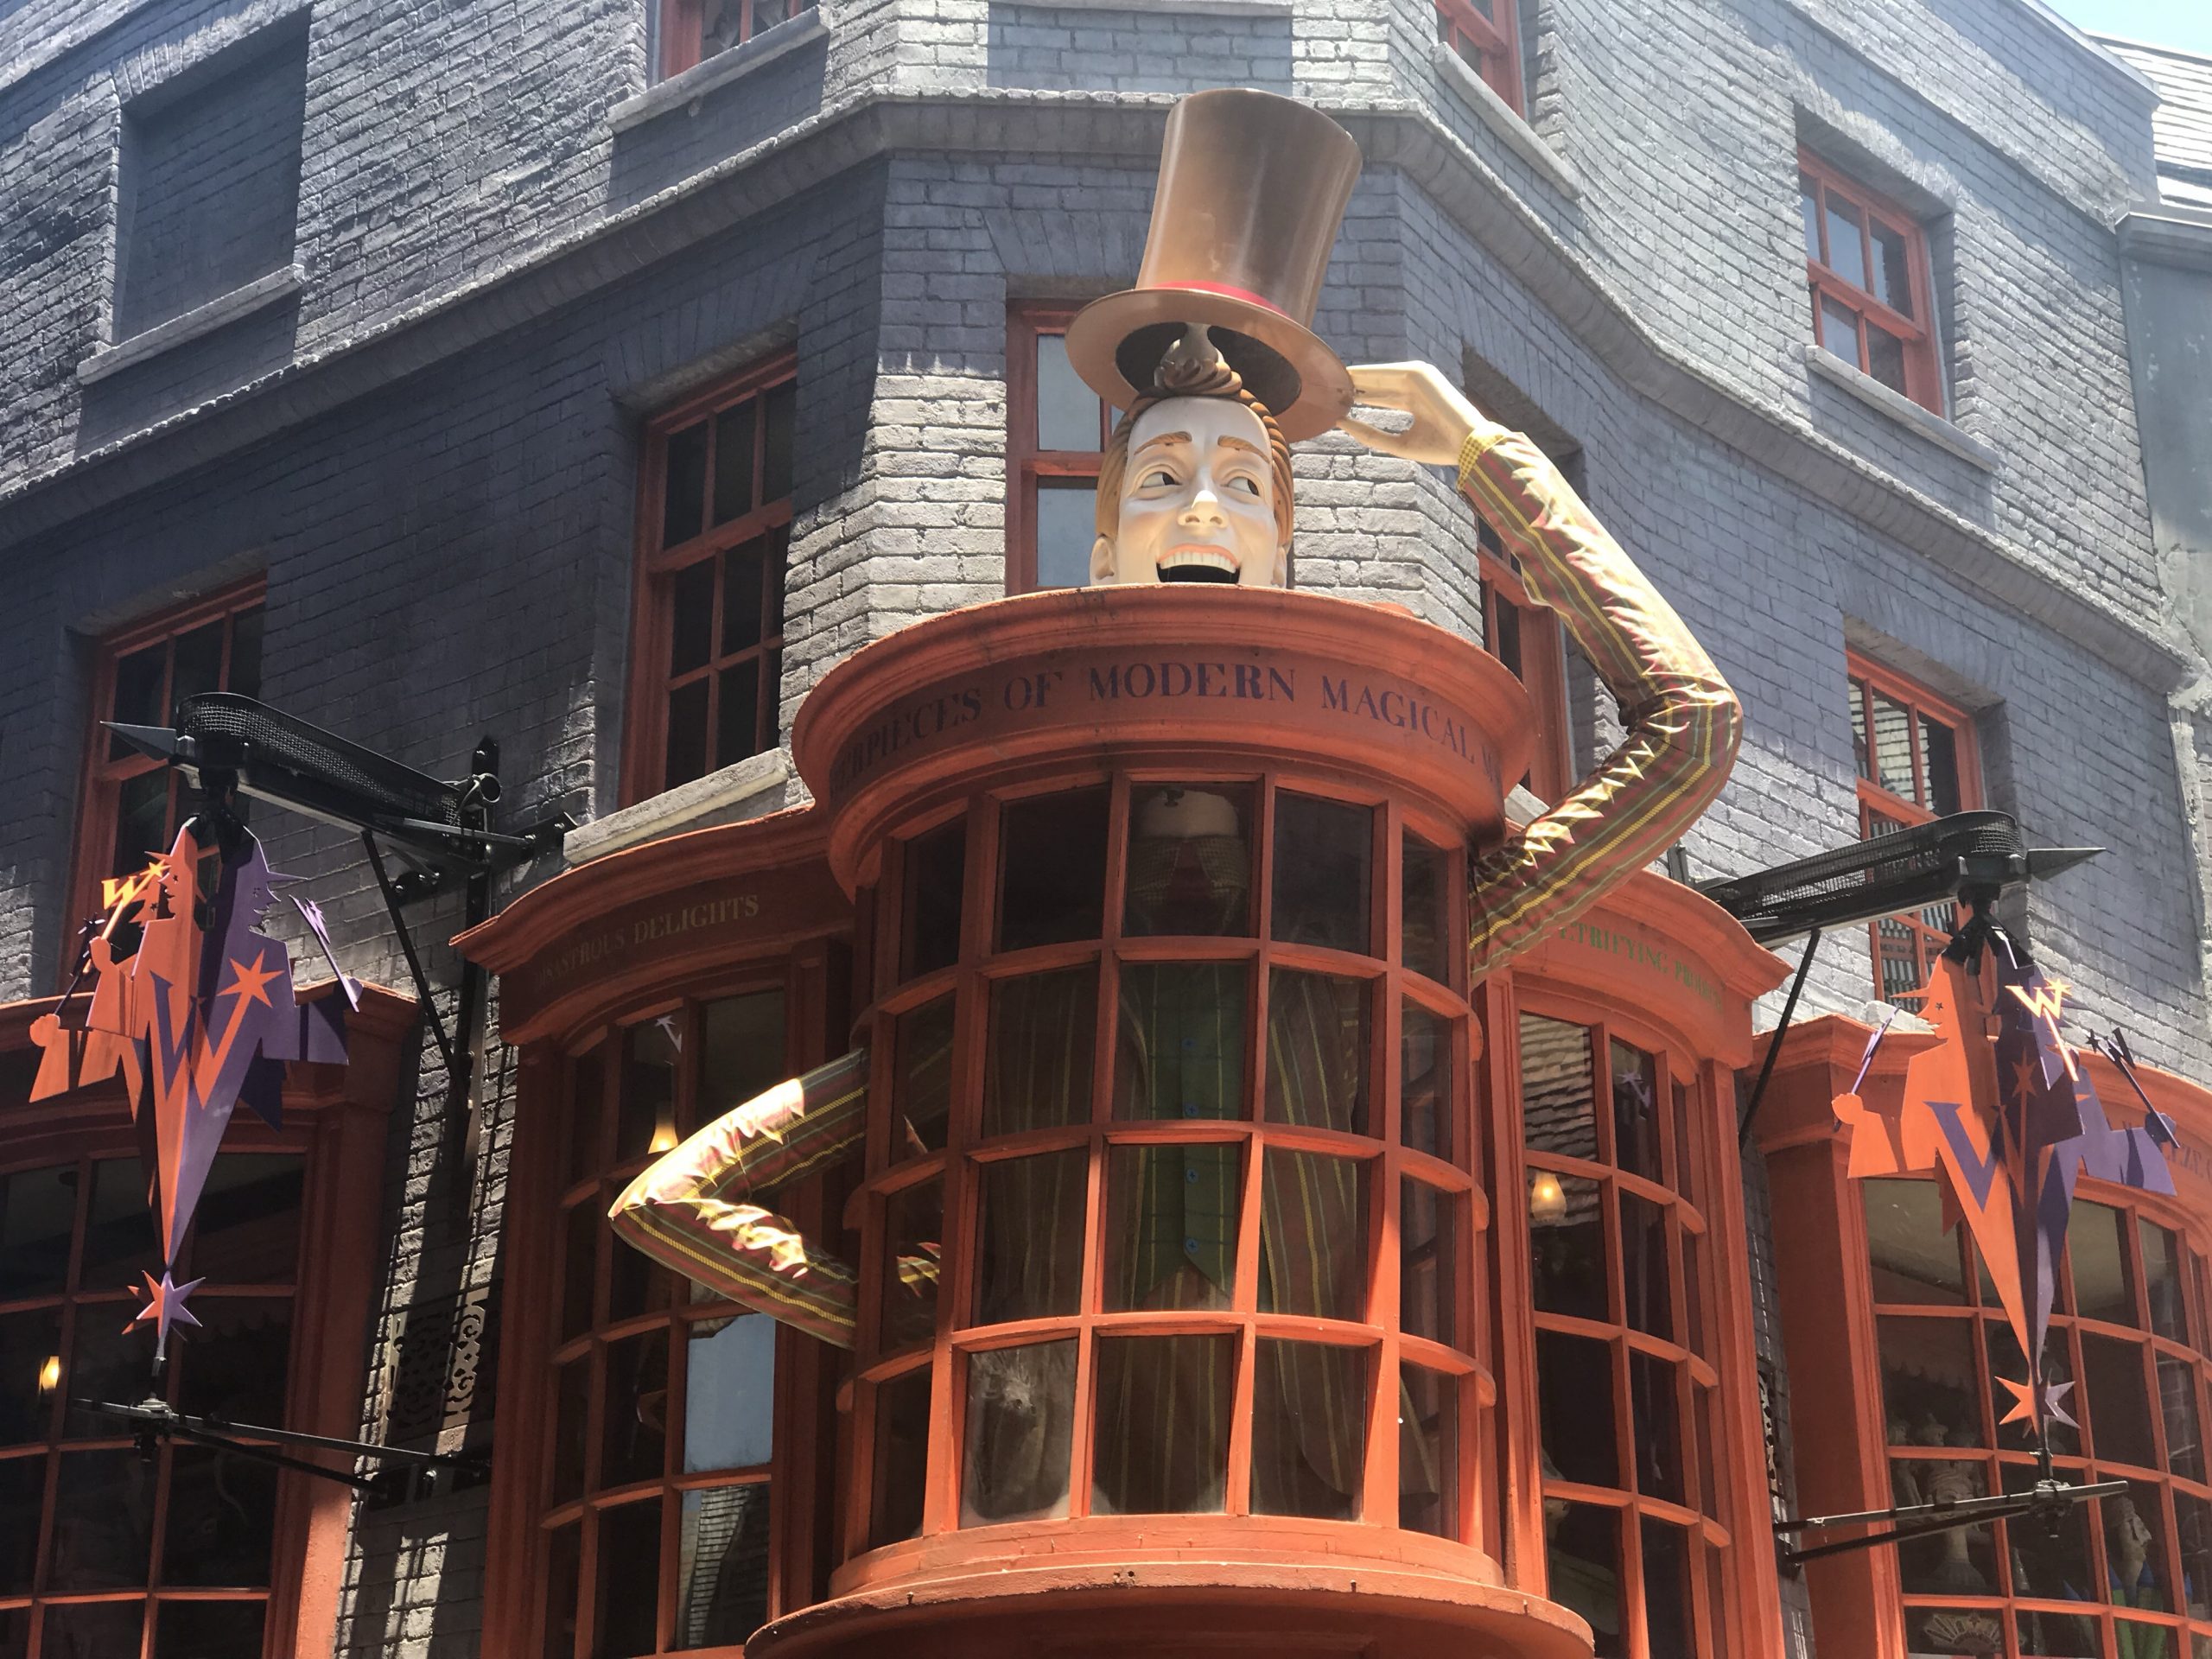 Find Out How The Merchandise Was Designed At Universal’s Weasleys’ Wizard Wheezes Shop